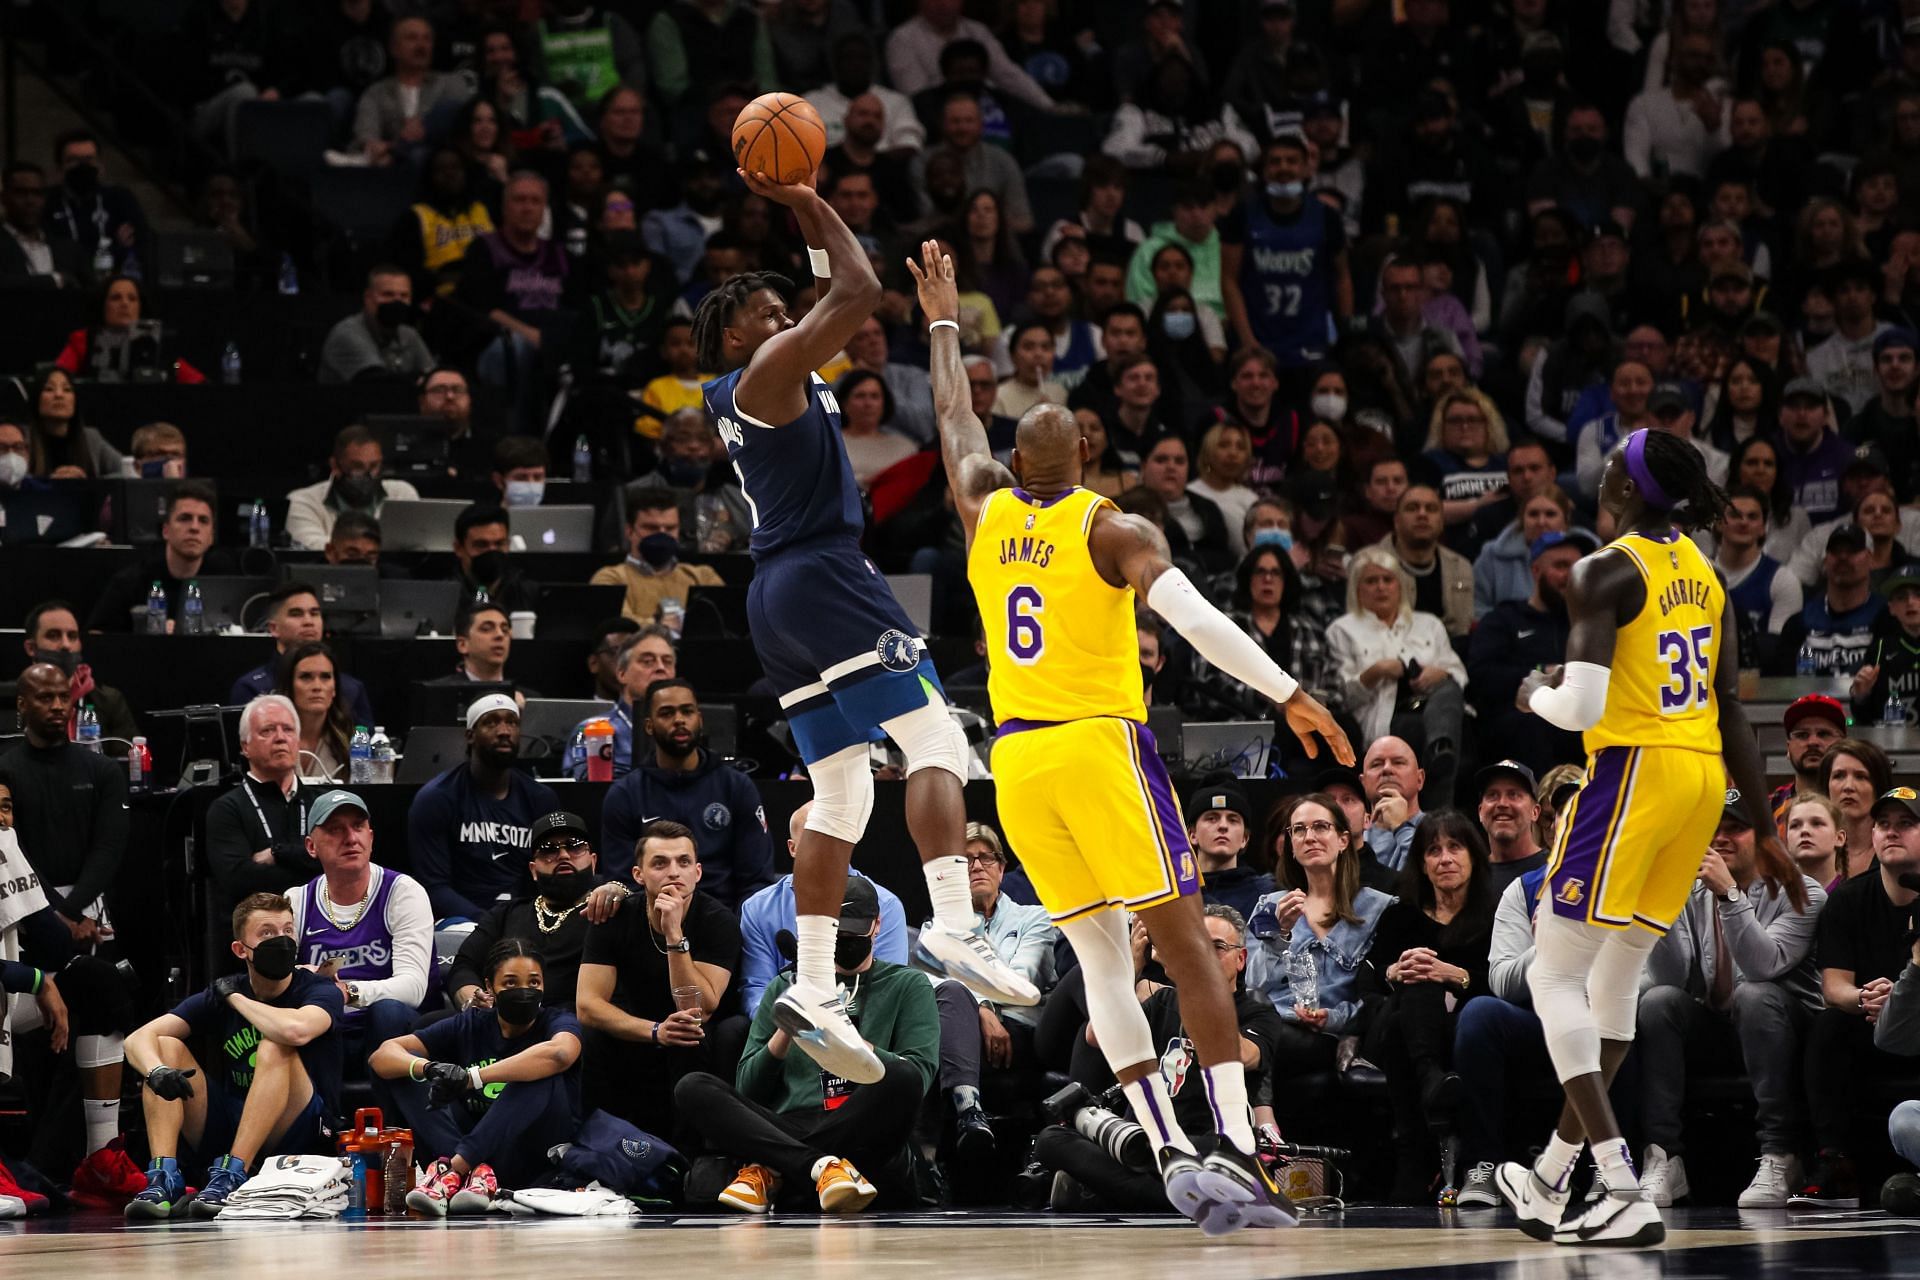 Anthony Edwards of the Minnesota Timberwolves shoots over LeBron James of the LA Lakers.